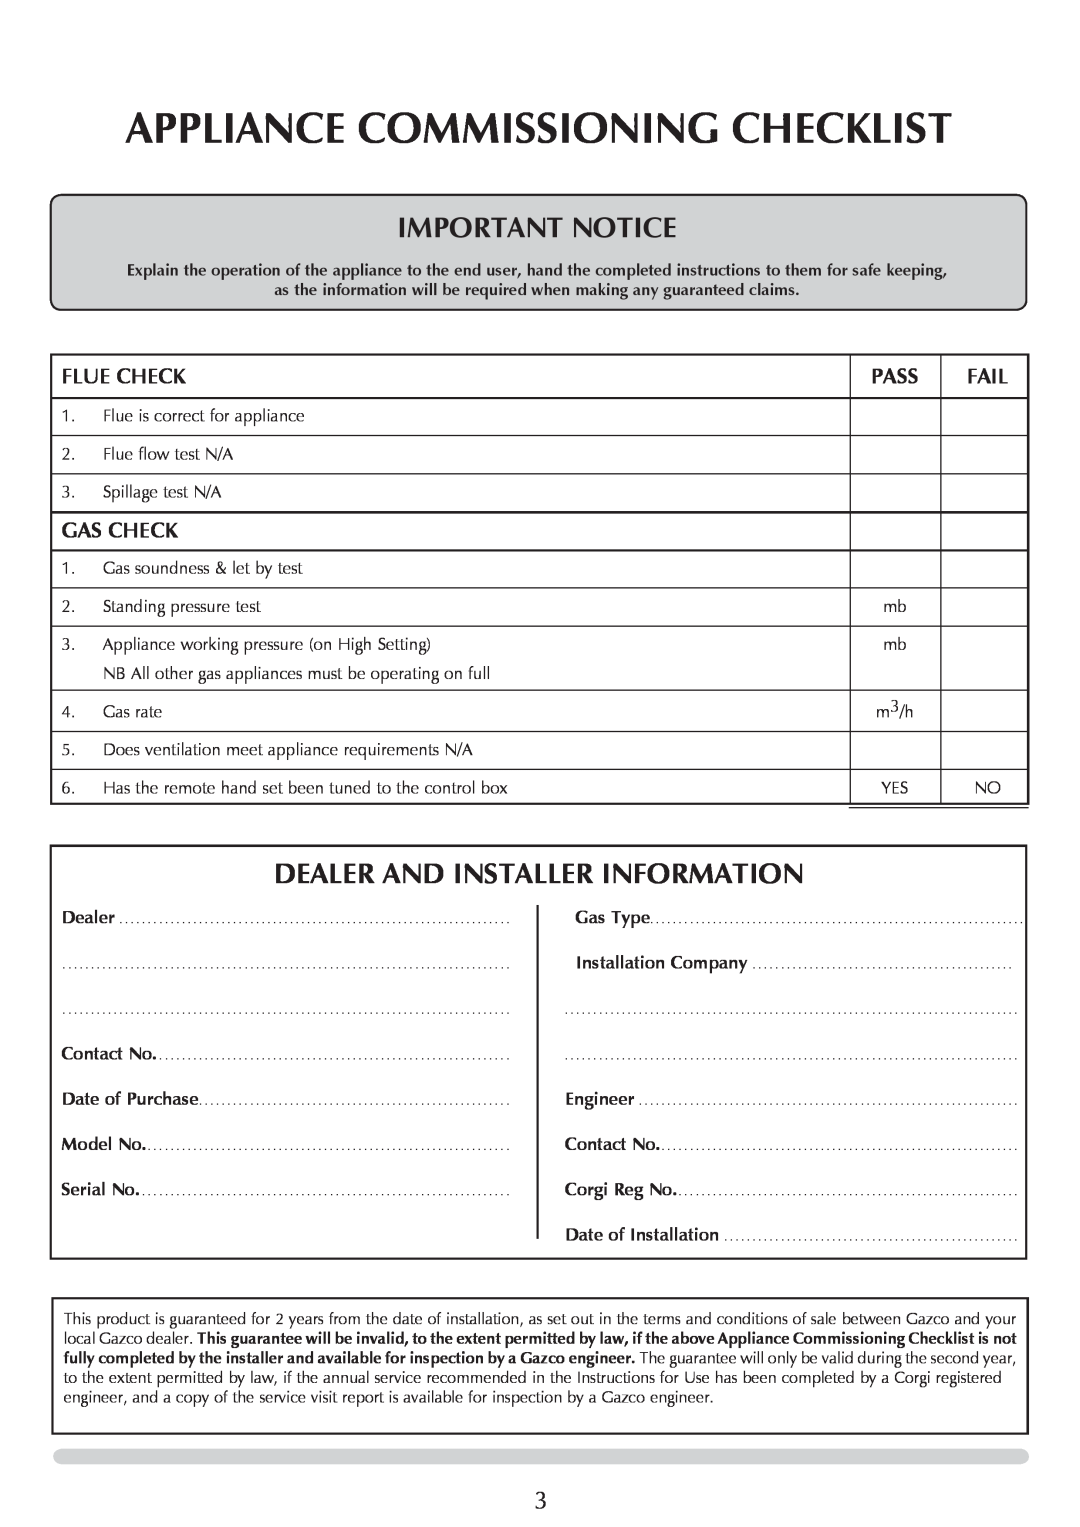 Stovax PR0731 manual Appliance Commissioning Checklist, IMPORTaNT NOTICE, Dealer And Installer Information 